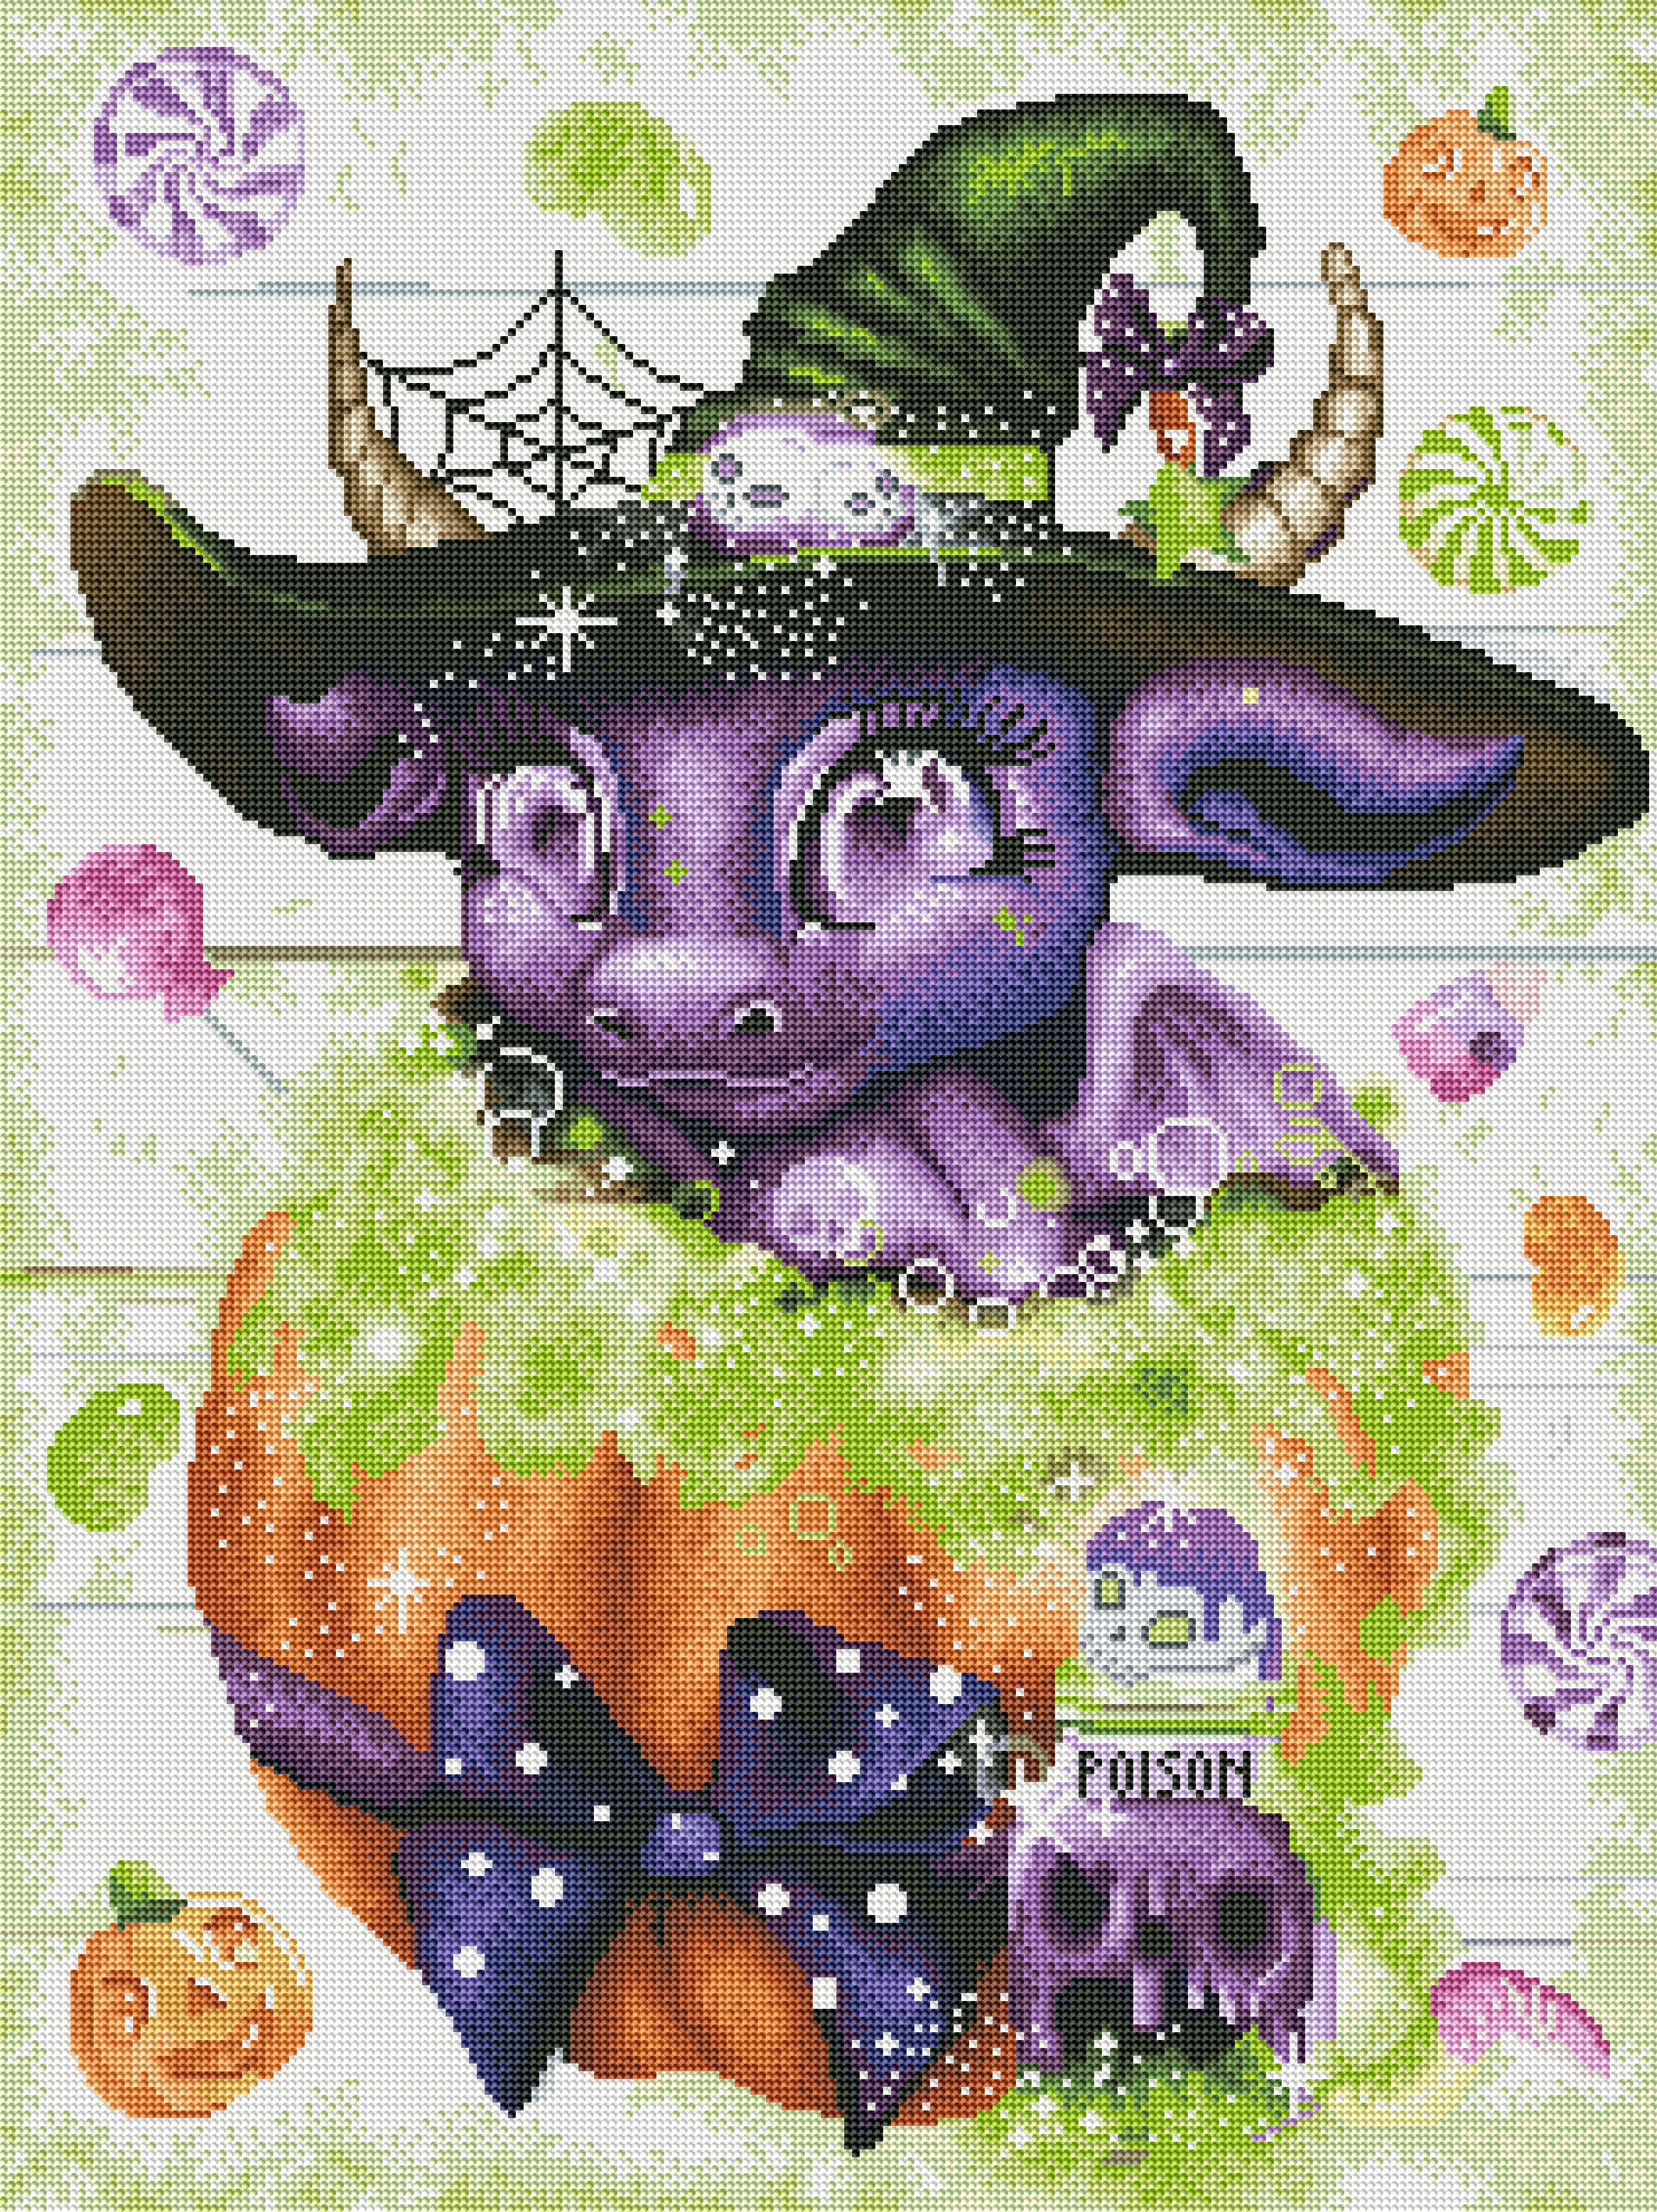 Witchy Halloween